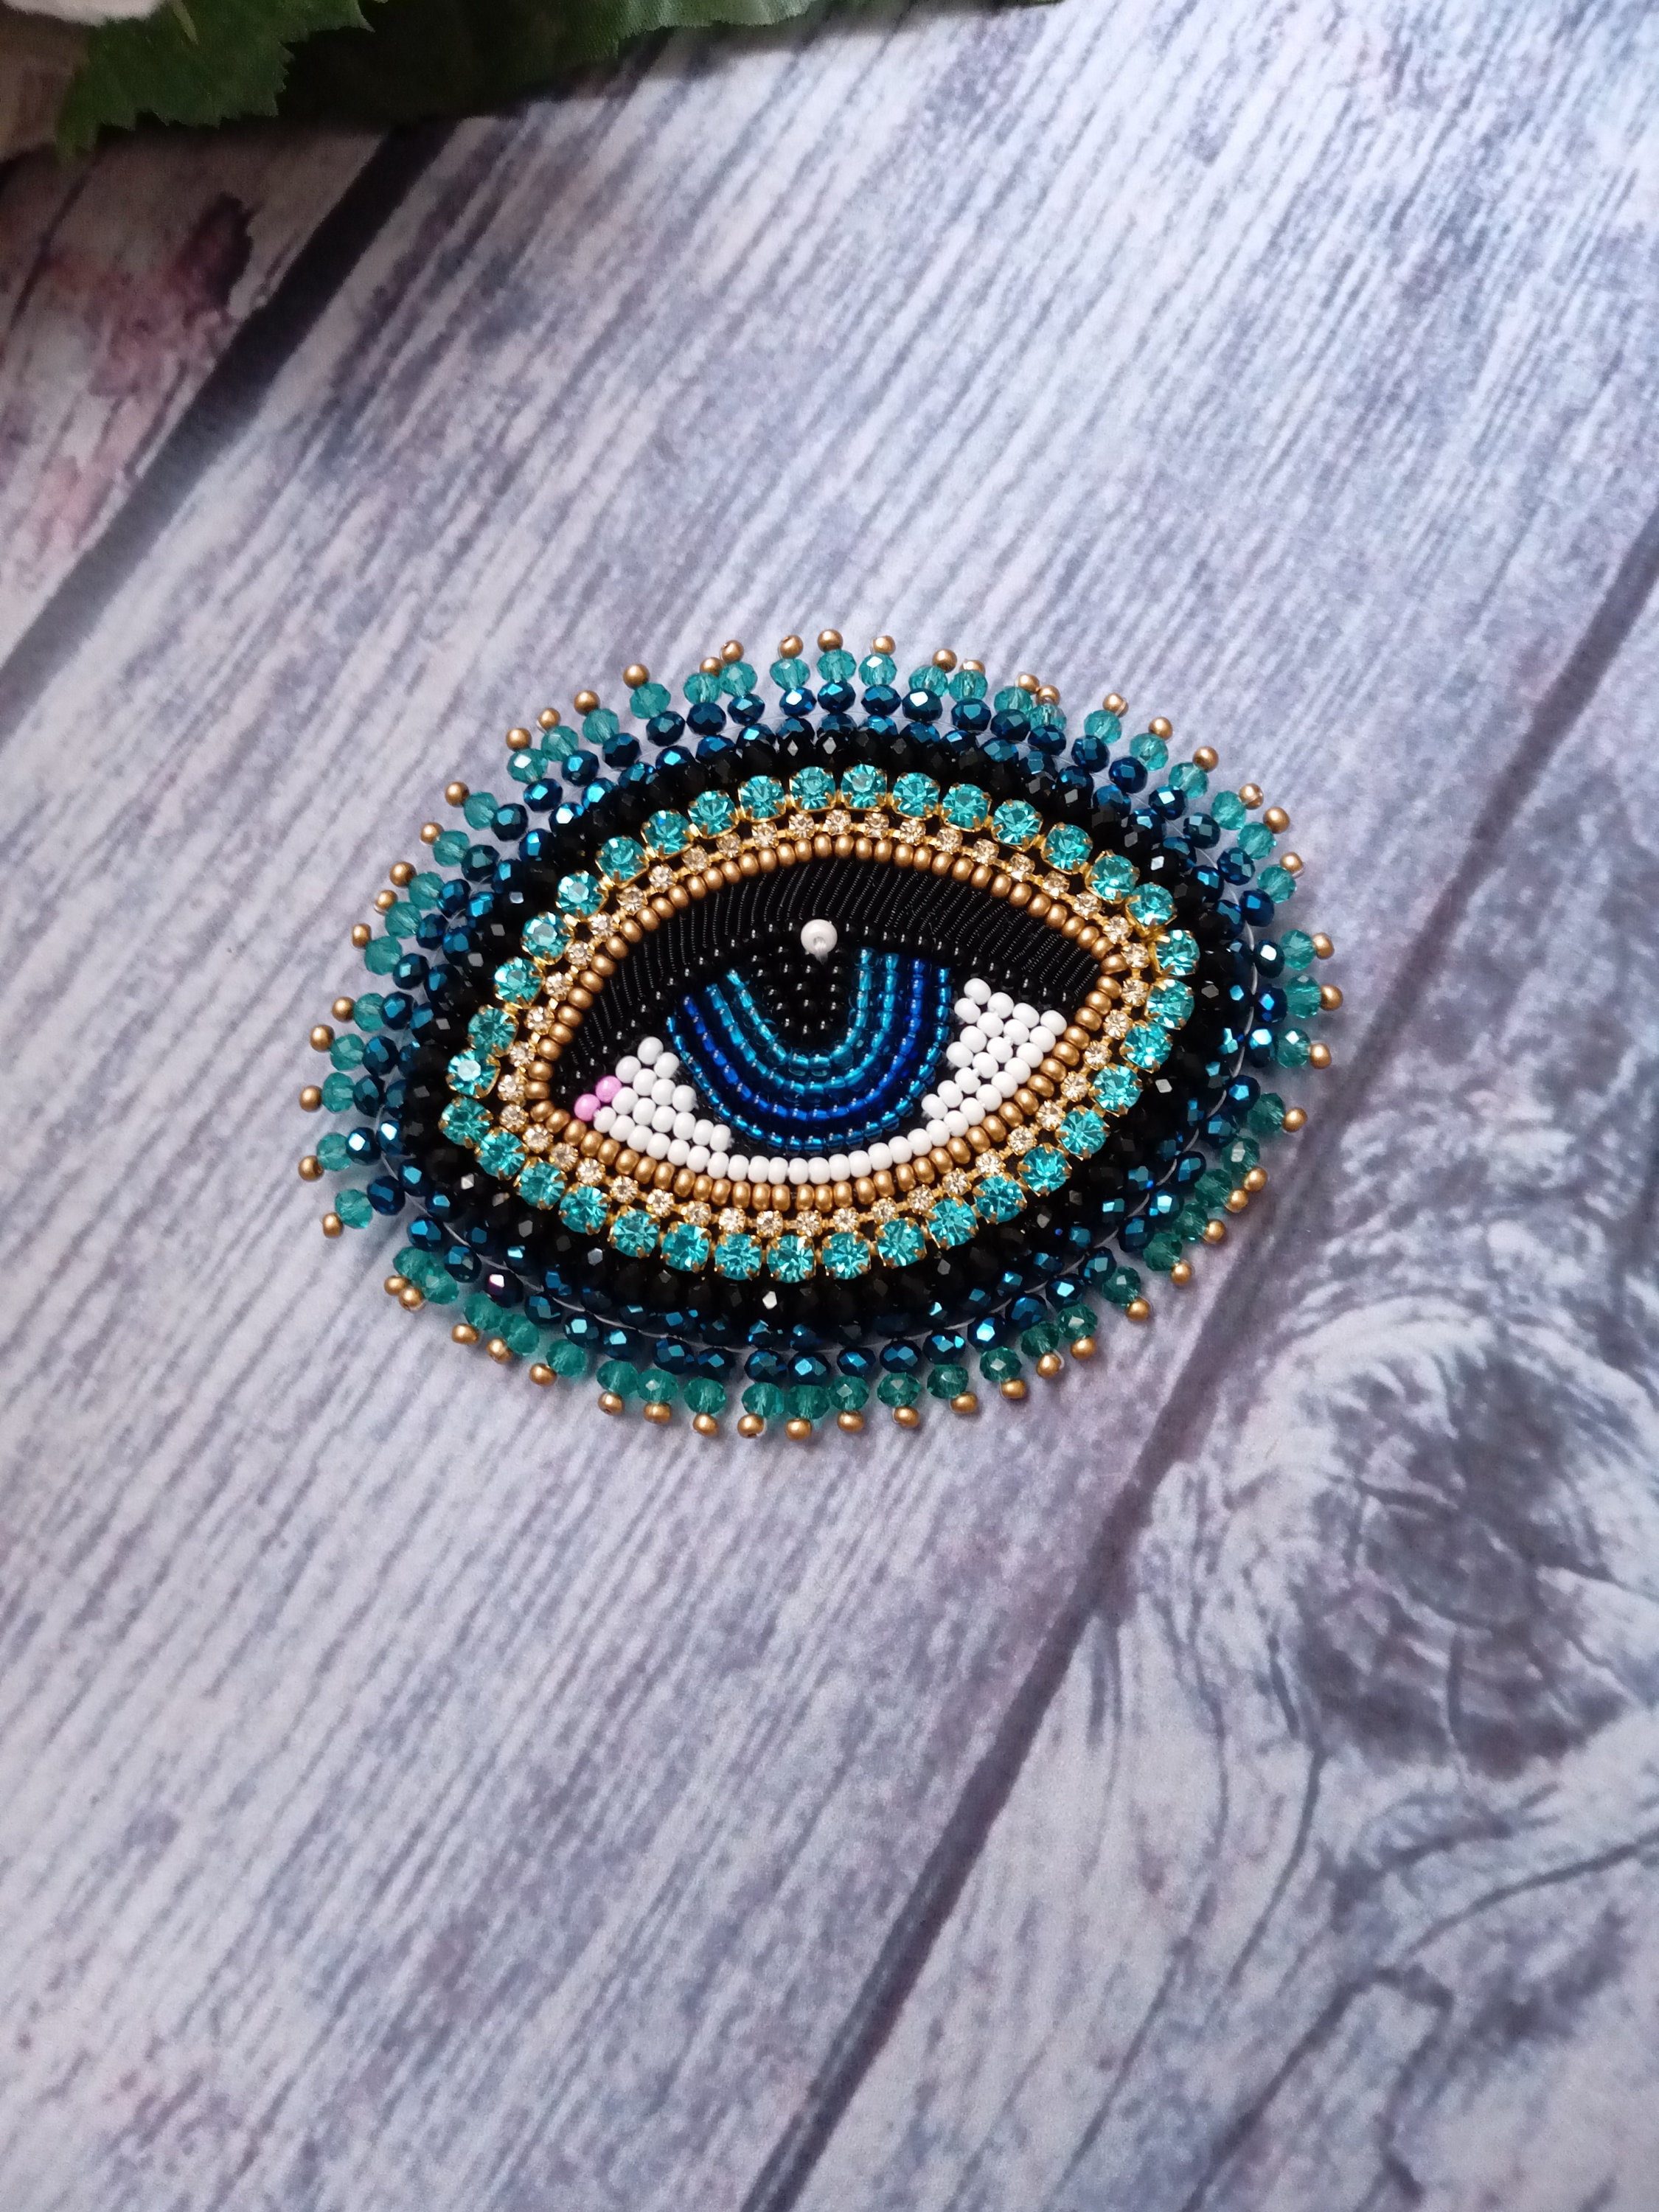 Beads Eye Brooches for Women Unisex Classic Big Beauty Eyes Party Office  Brooch Pin Gifts 